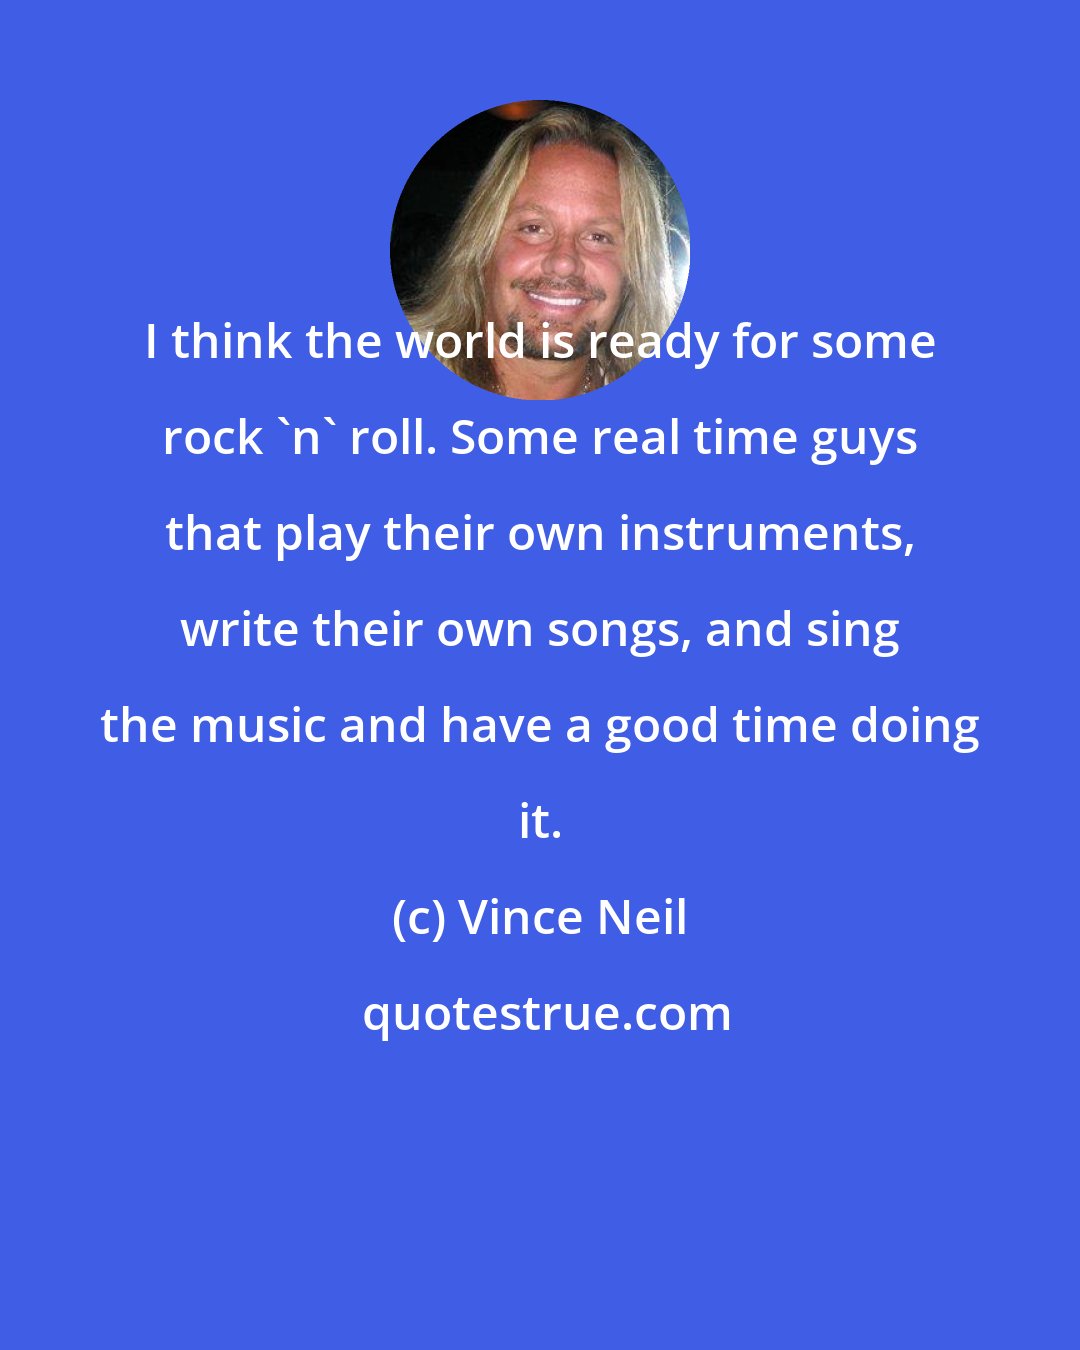 Vince Neil: I think the world is ready for some rock 'n' roll. Some real time guys that play their own instruments, write their own songs, and sing the music and have a good time doing it.